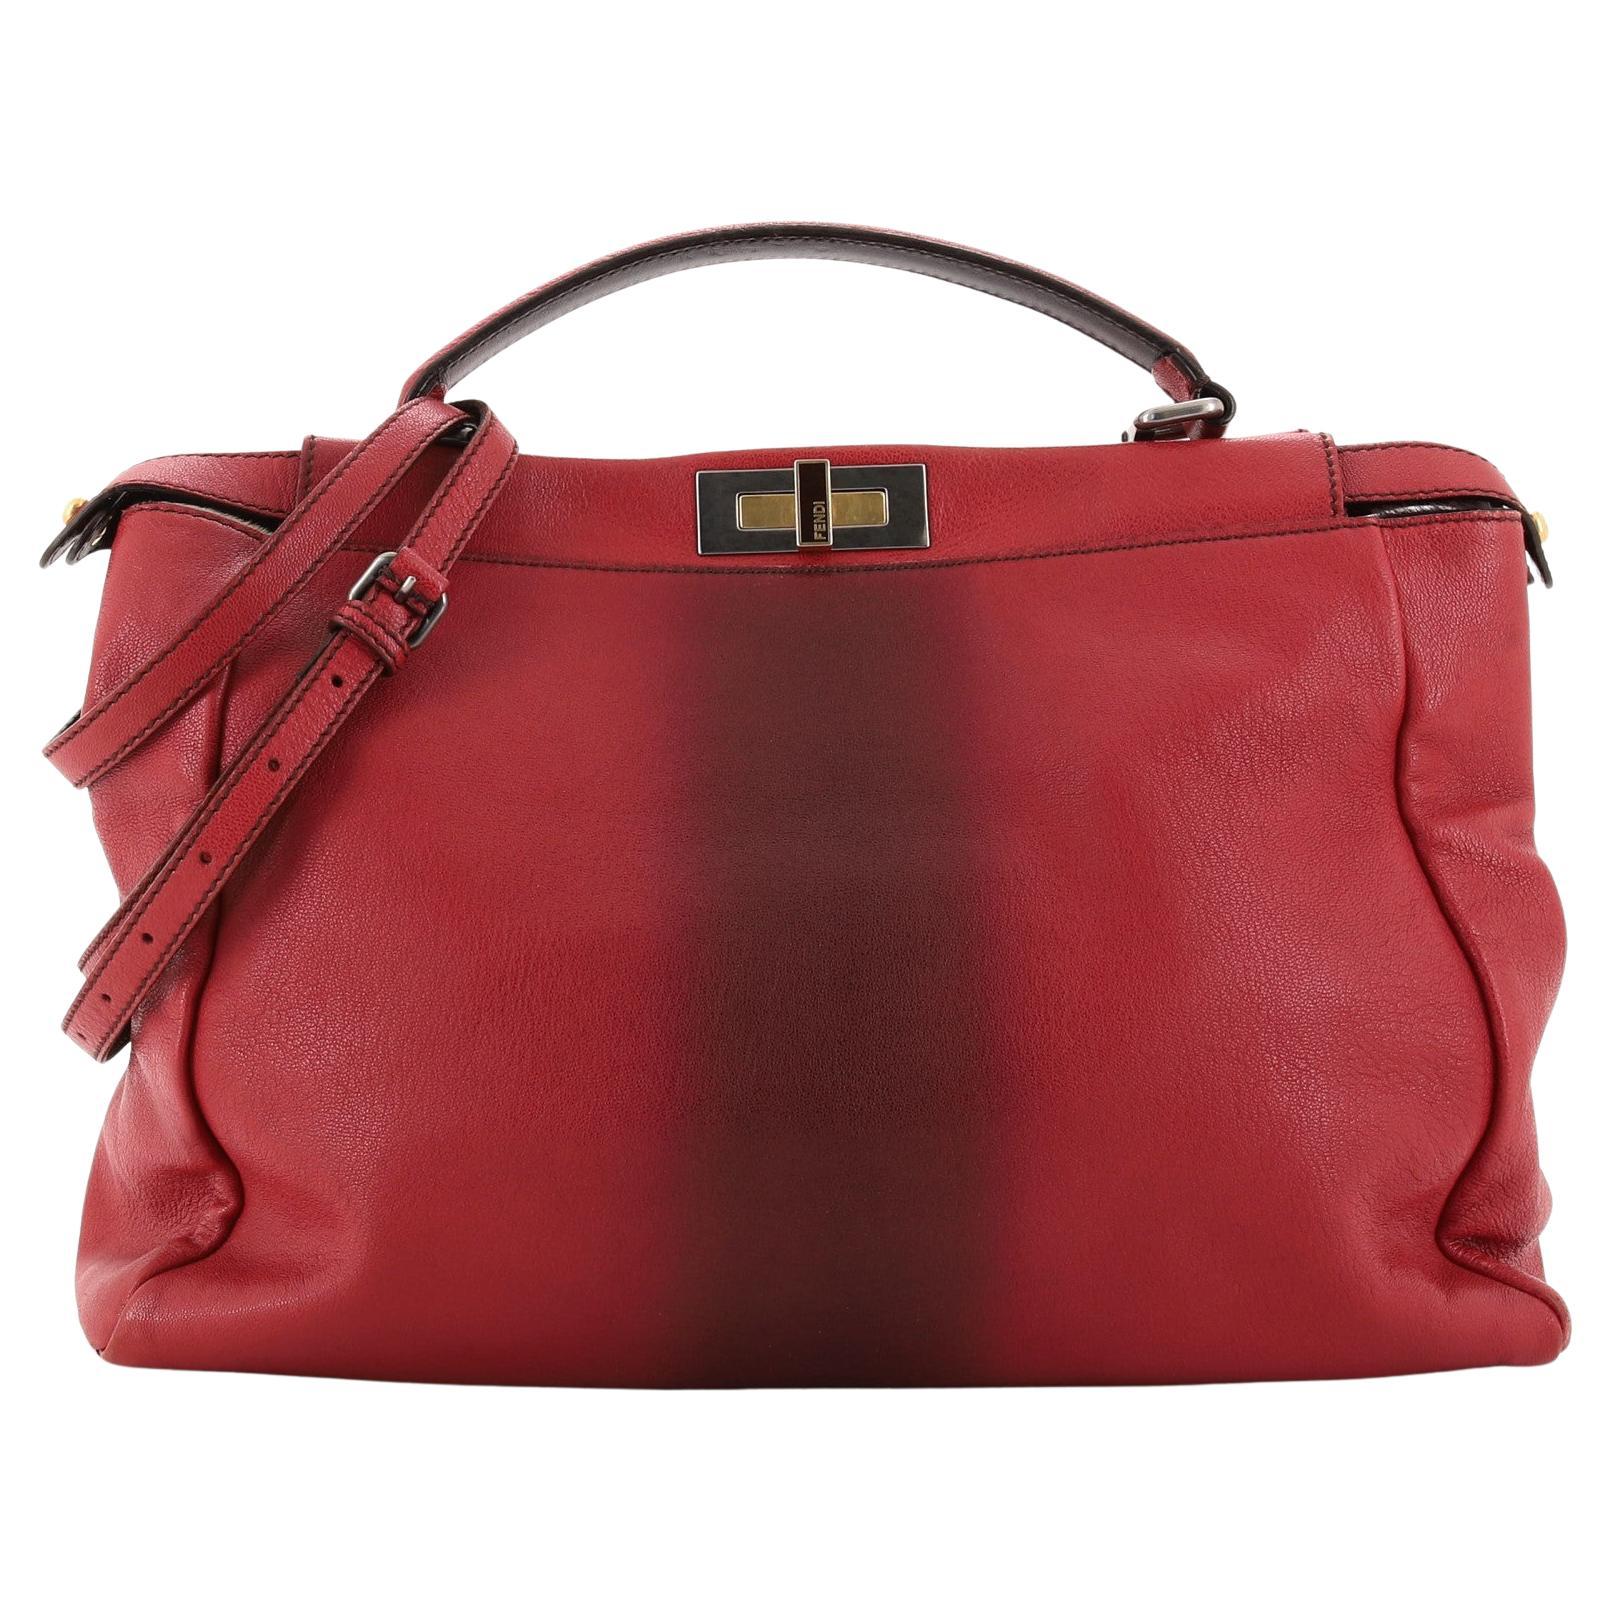 Fendi Peekaboo Bag Ombre Leather with Calf Hair Interior Large